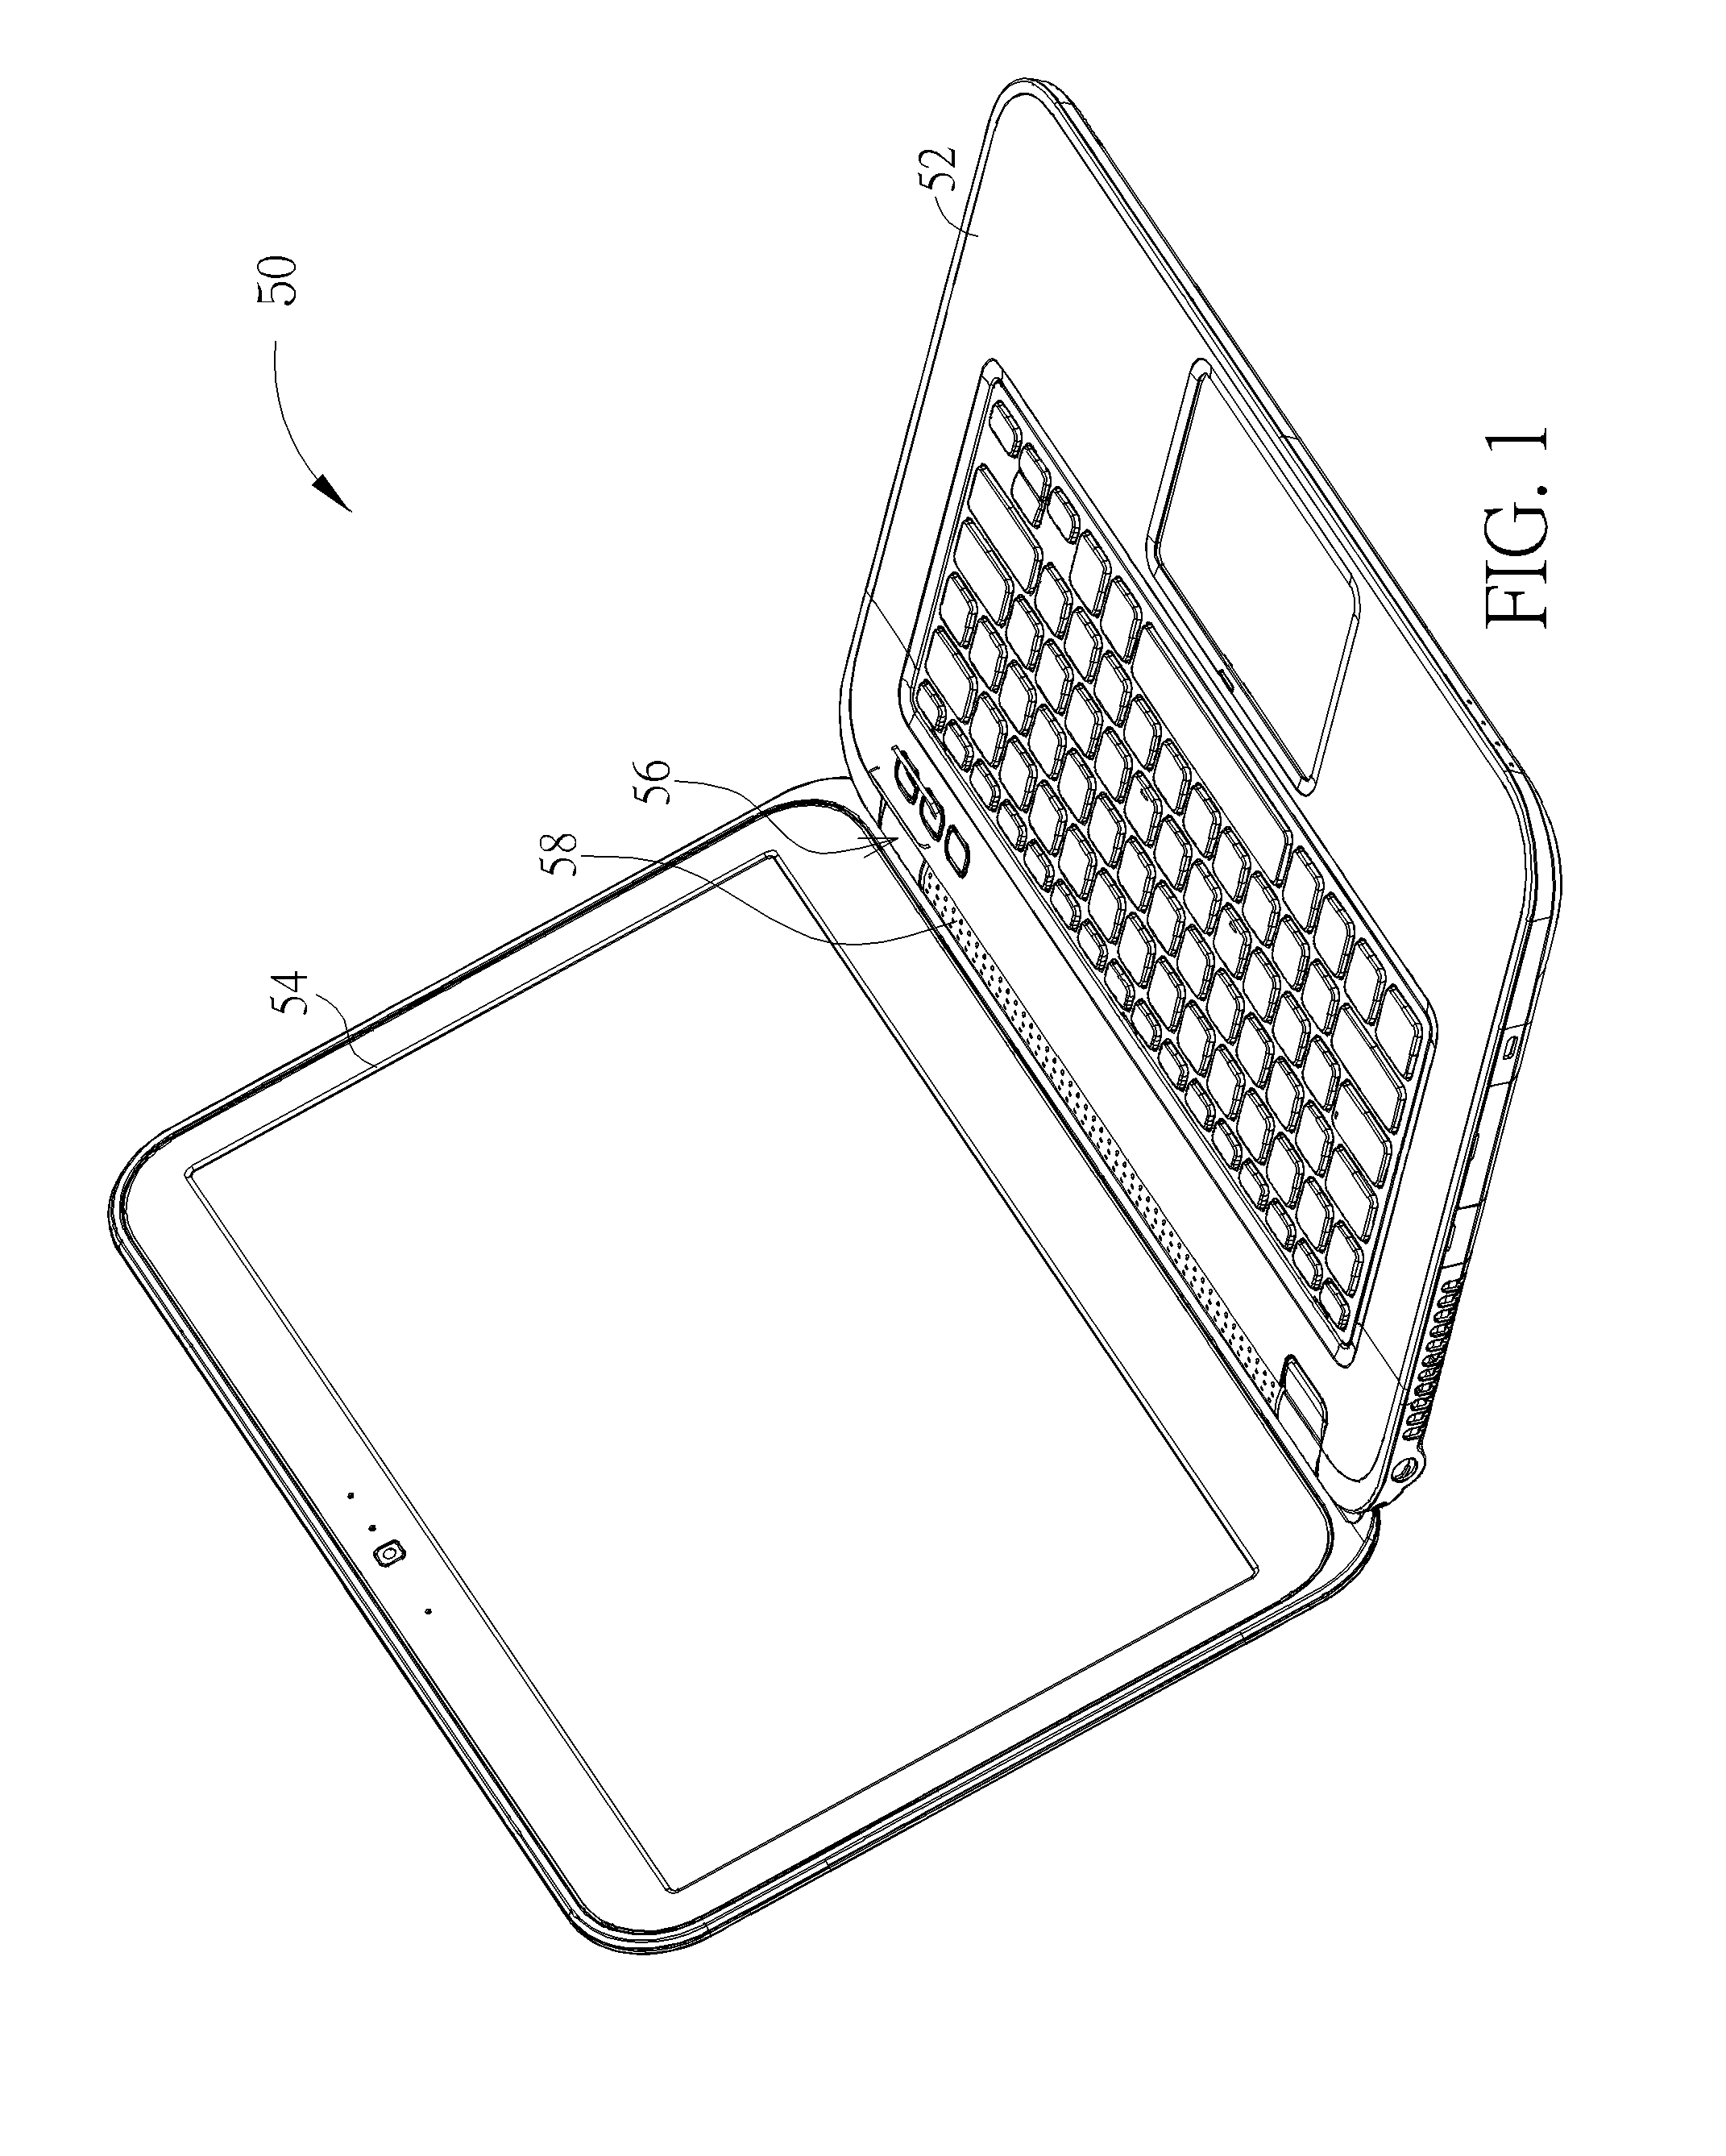 Portable electronic device with an electronic module